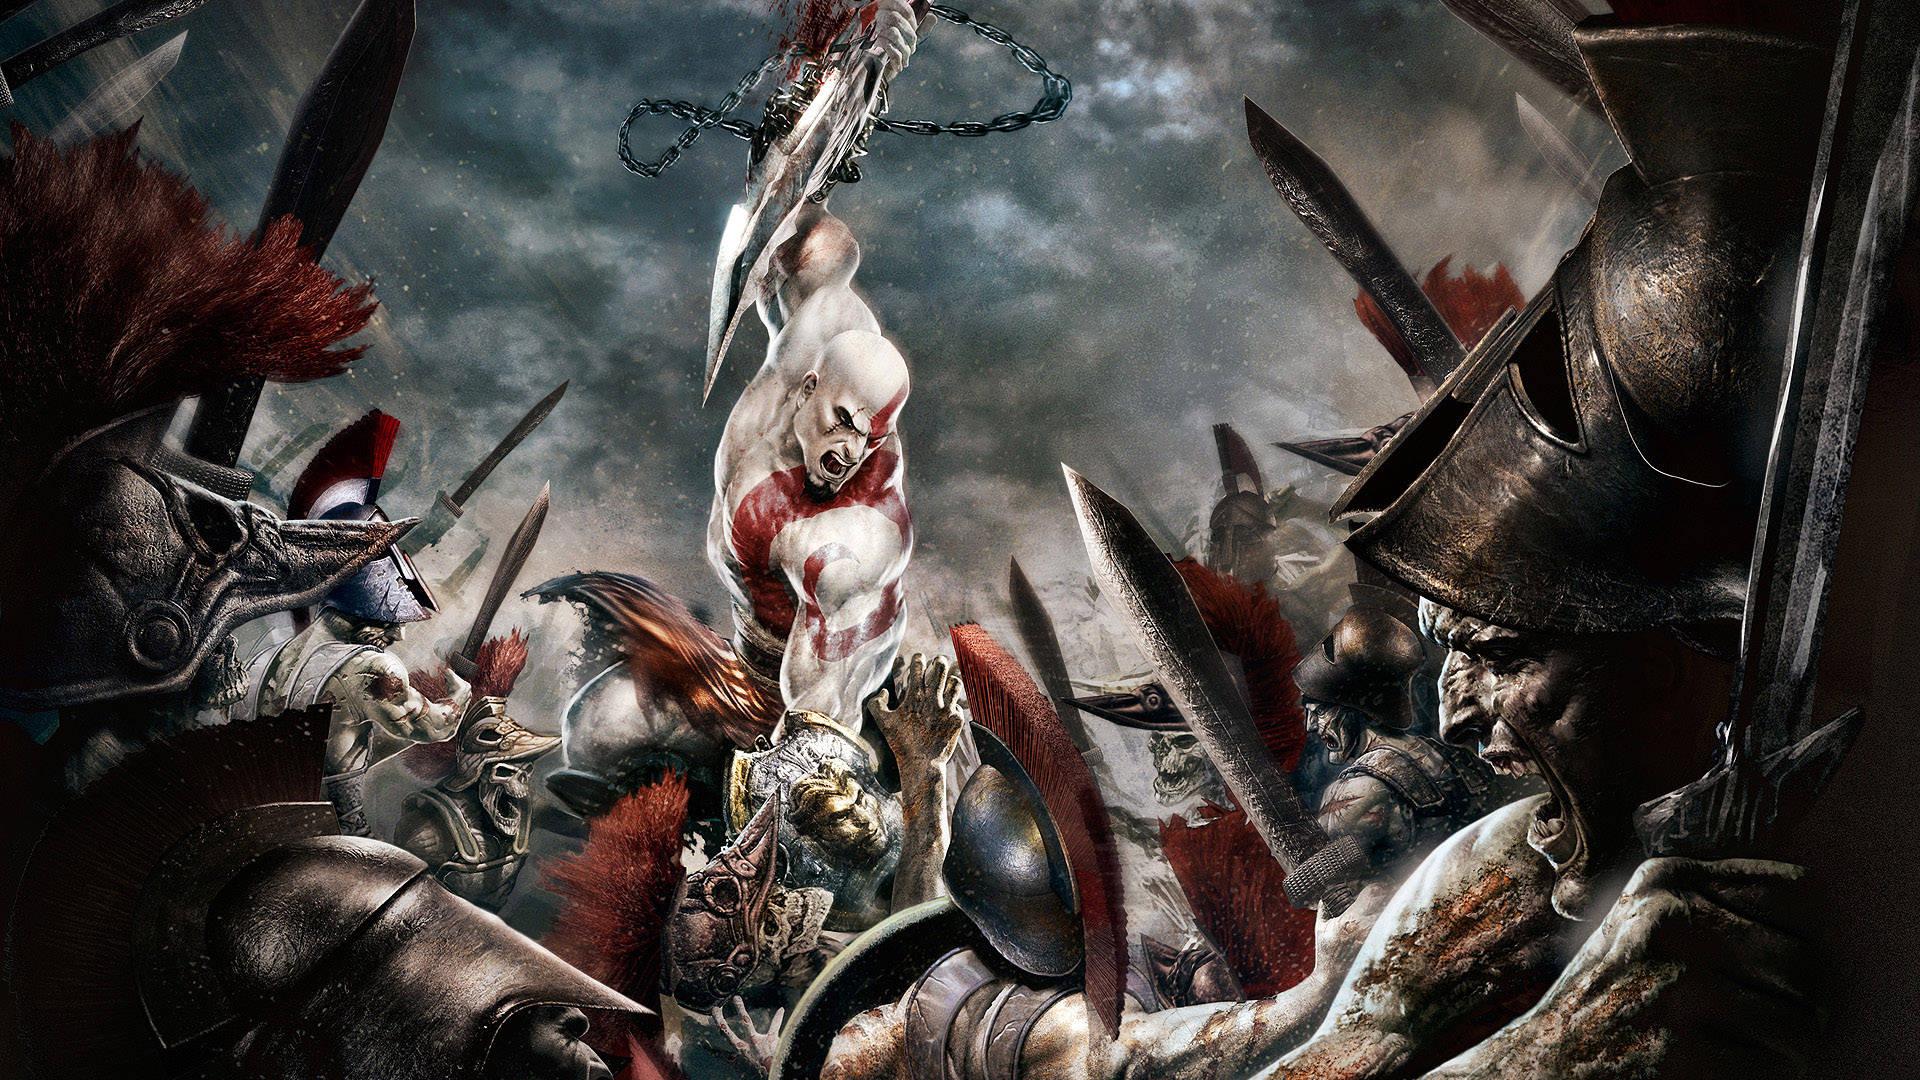 Kratos, a Spartan warrior, leads the charge against an army in the God Of War series. Wallpaper